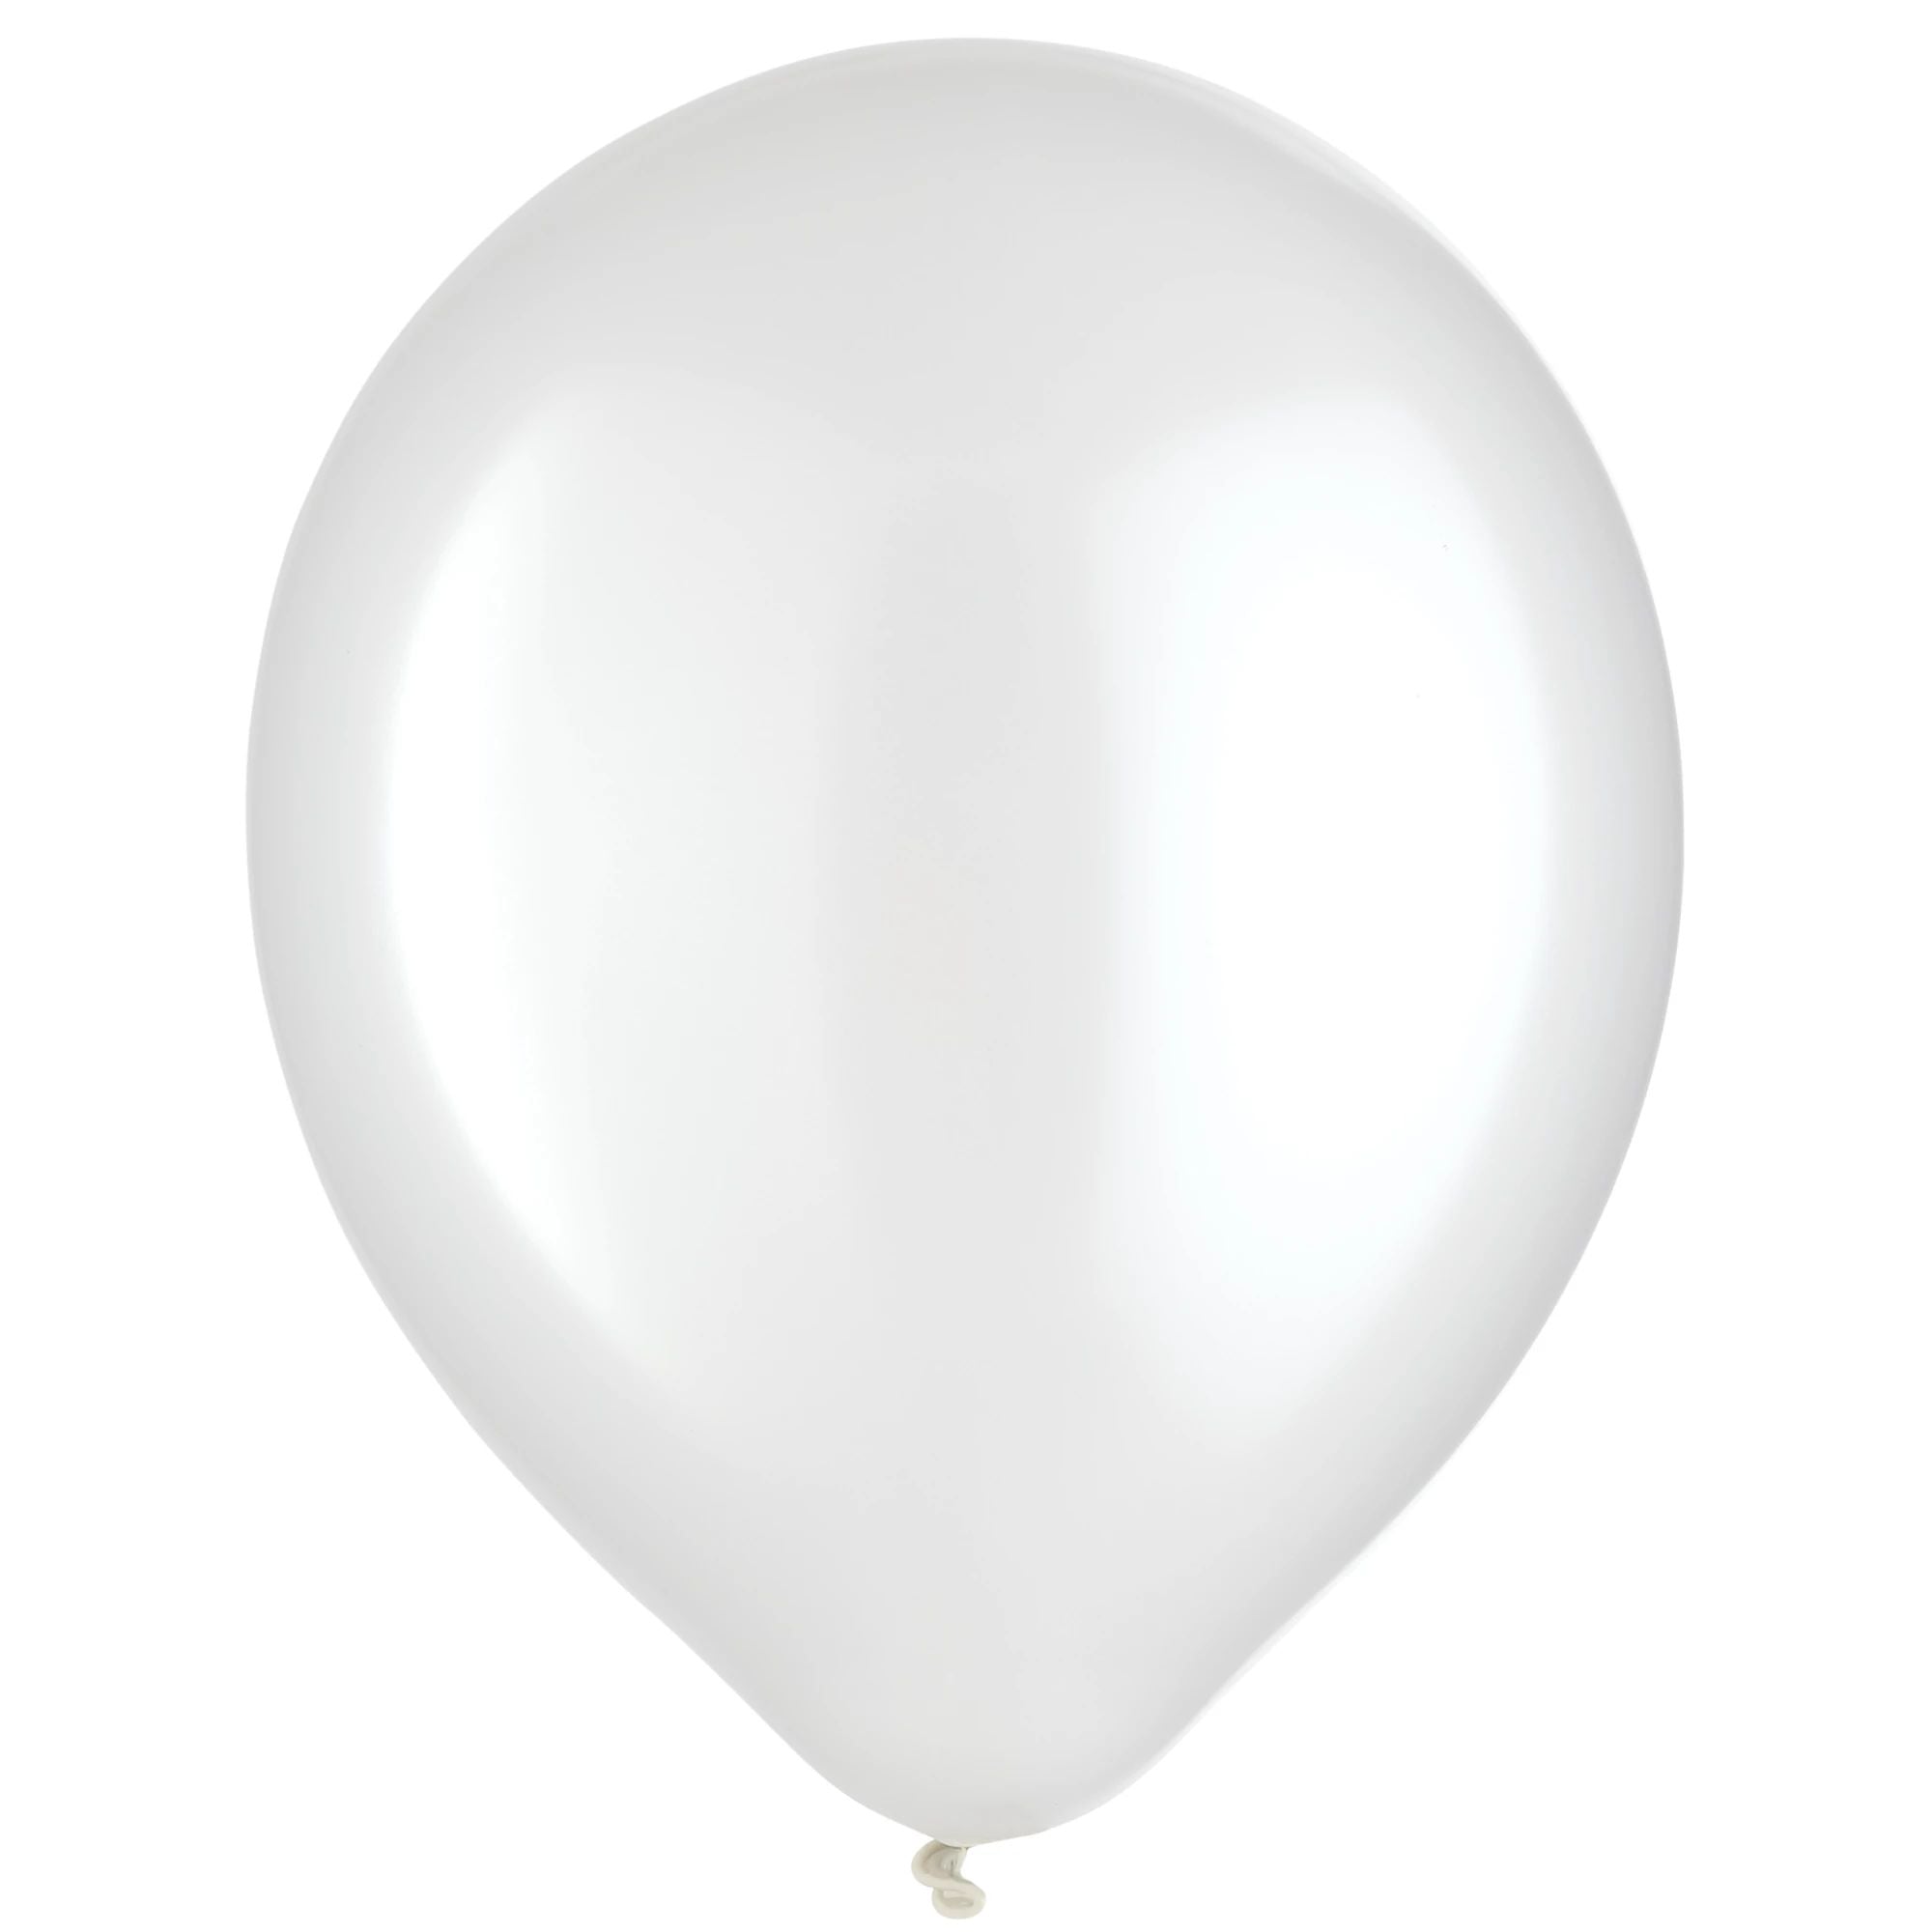 Pearl White 11 inch Helium Quality Latex Balloon Helium Inflated